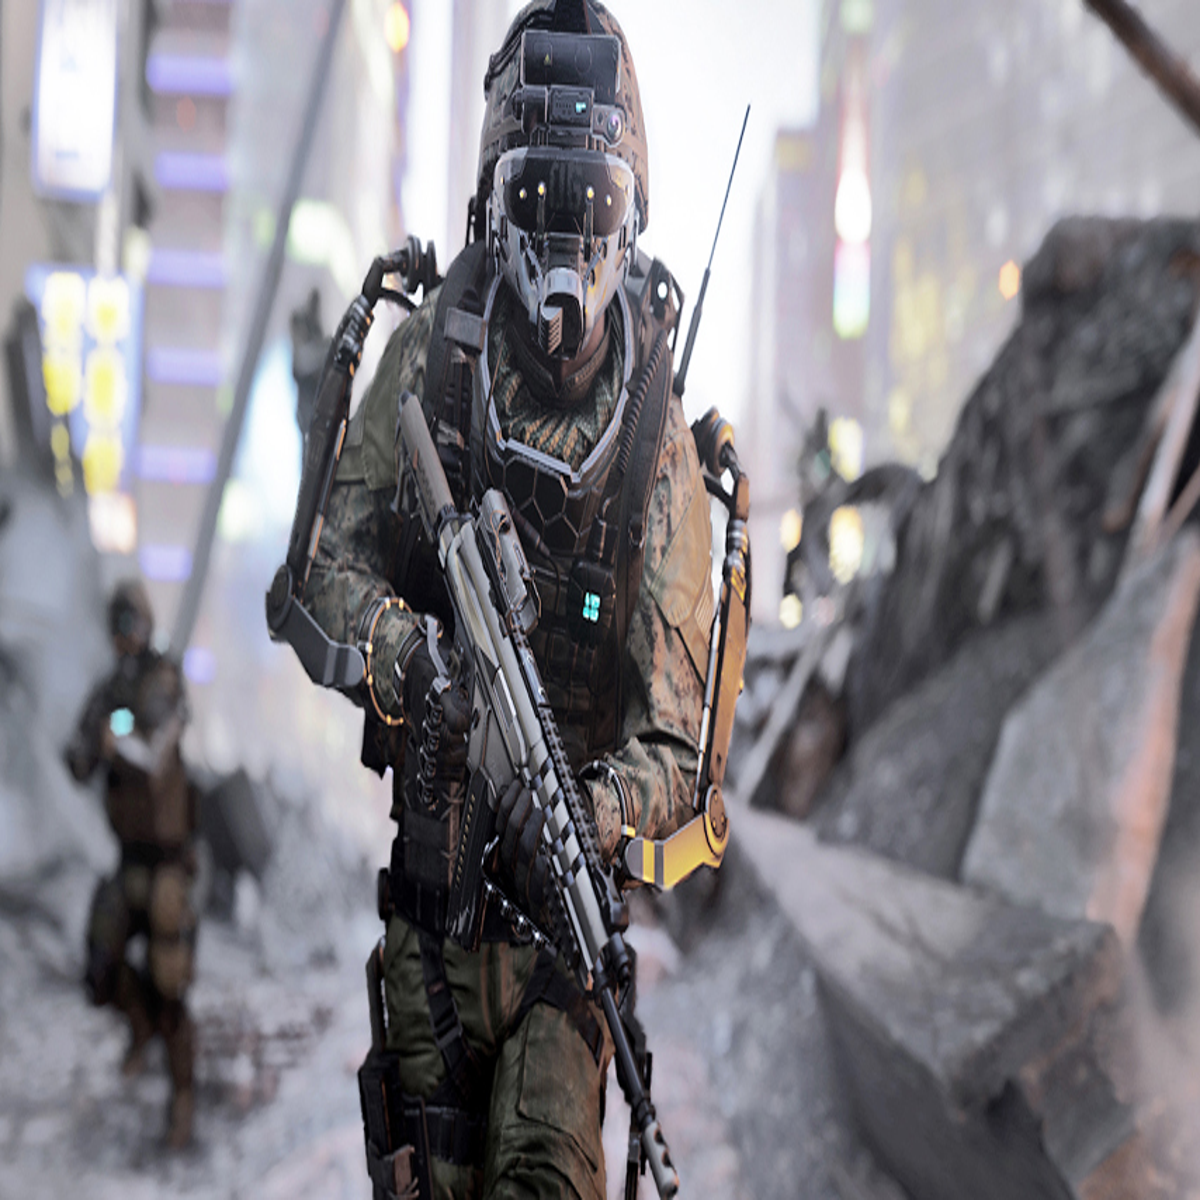 of Duty: Advanced were the top-sellers in the US in 2014 | VG247